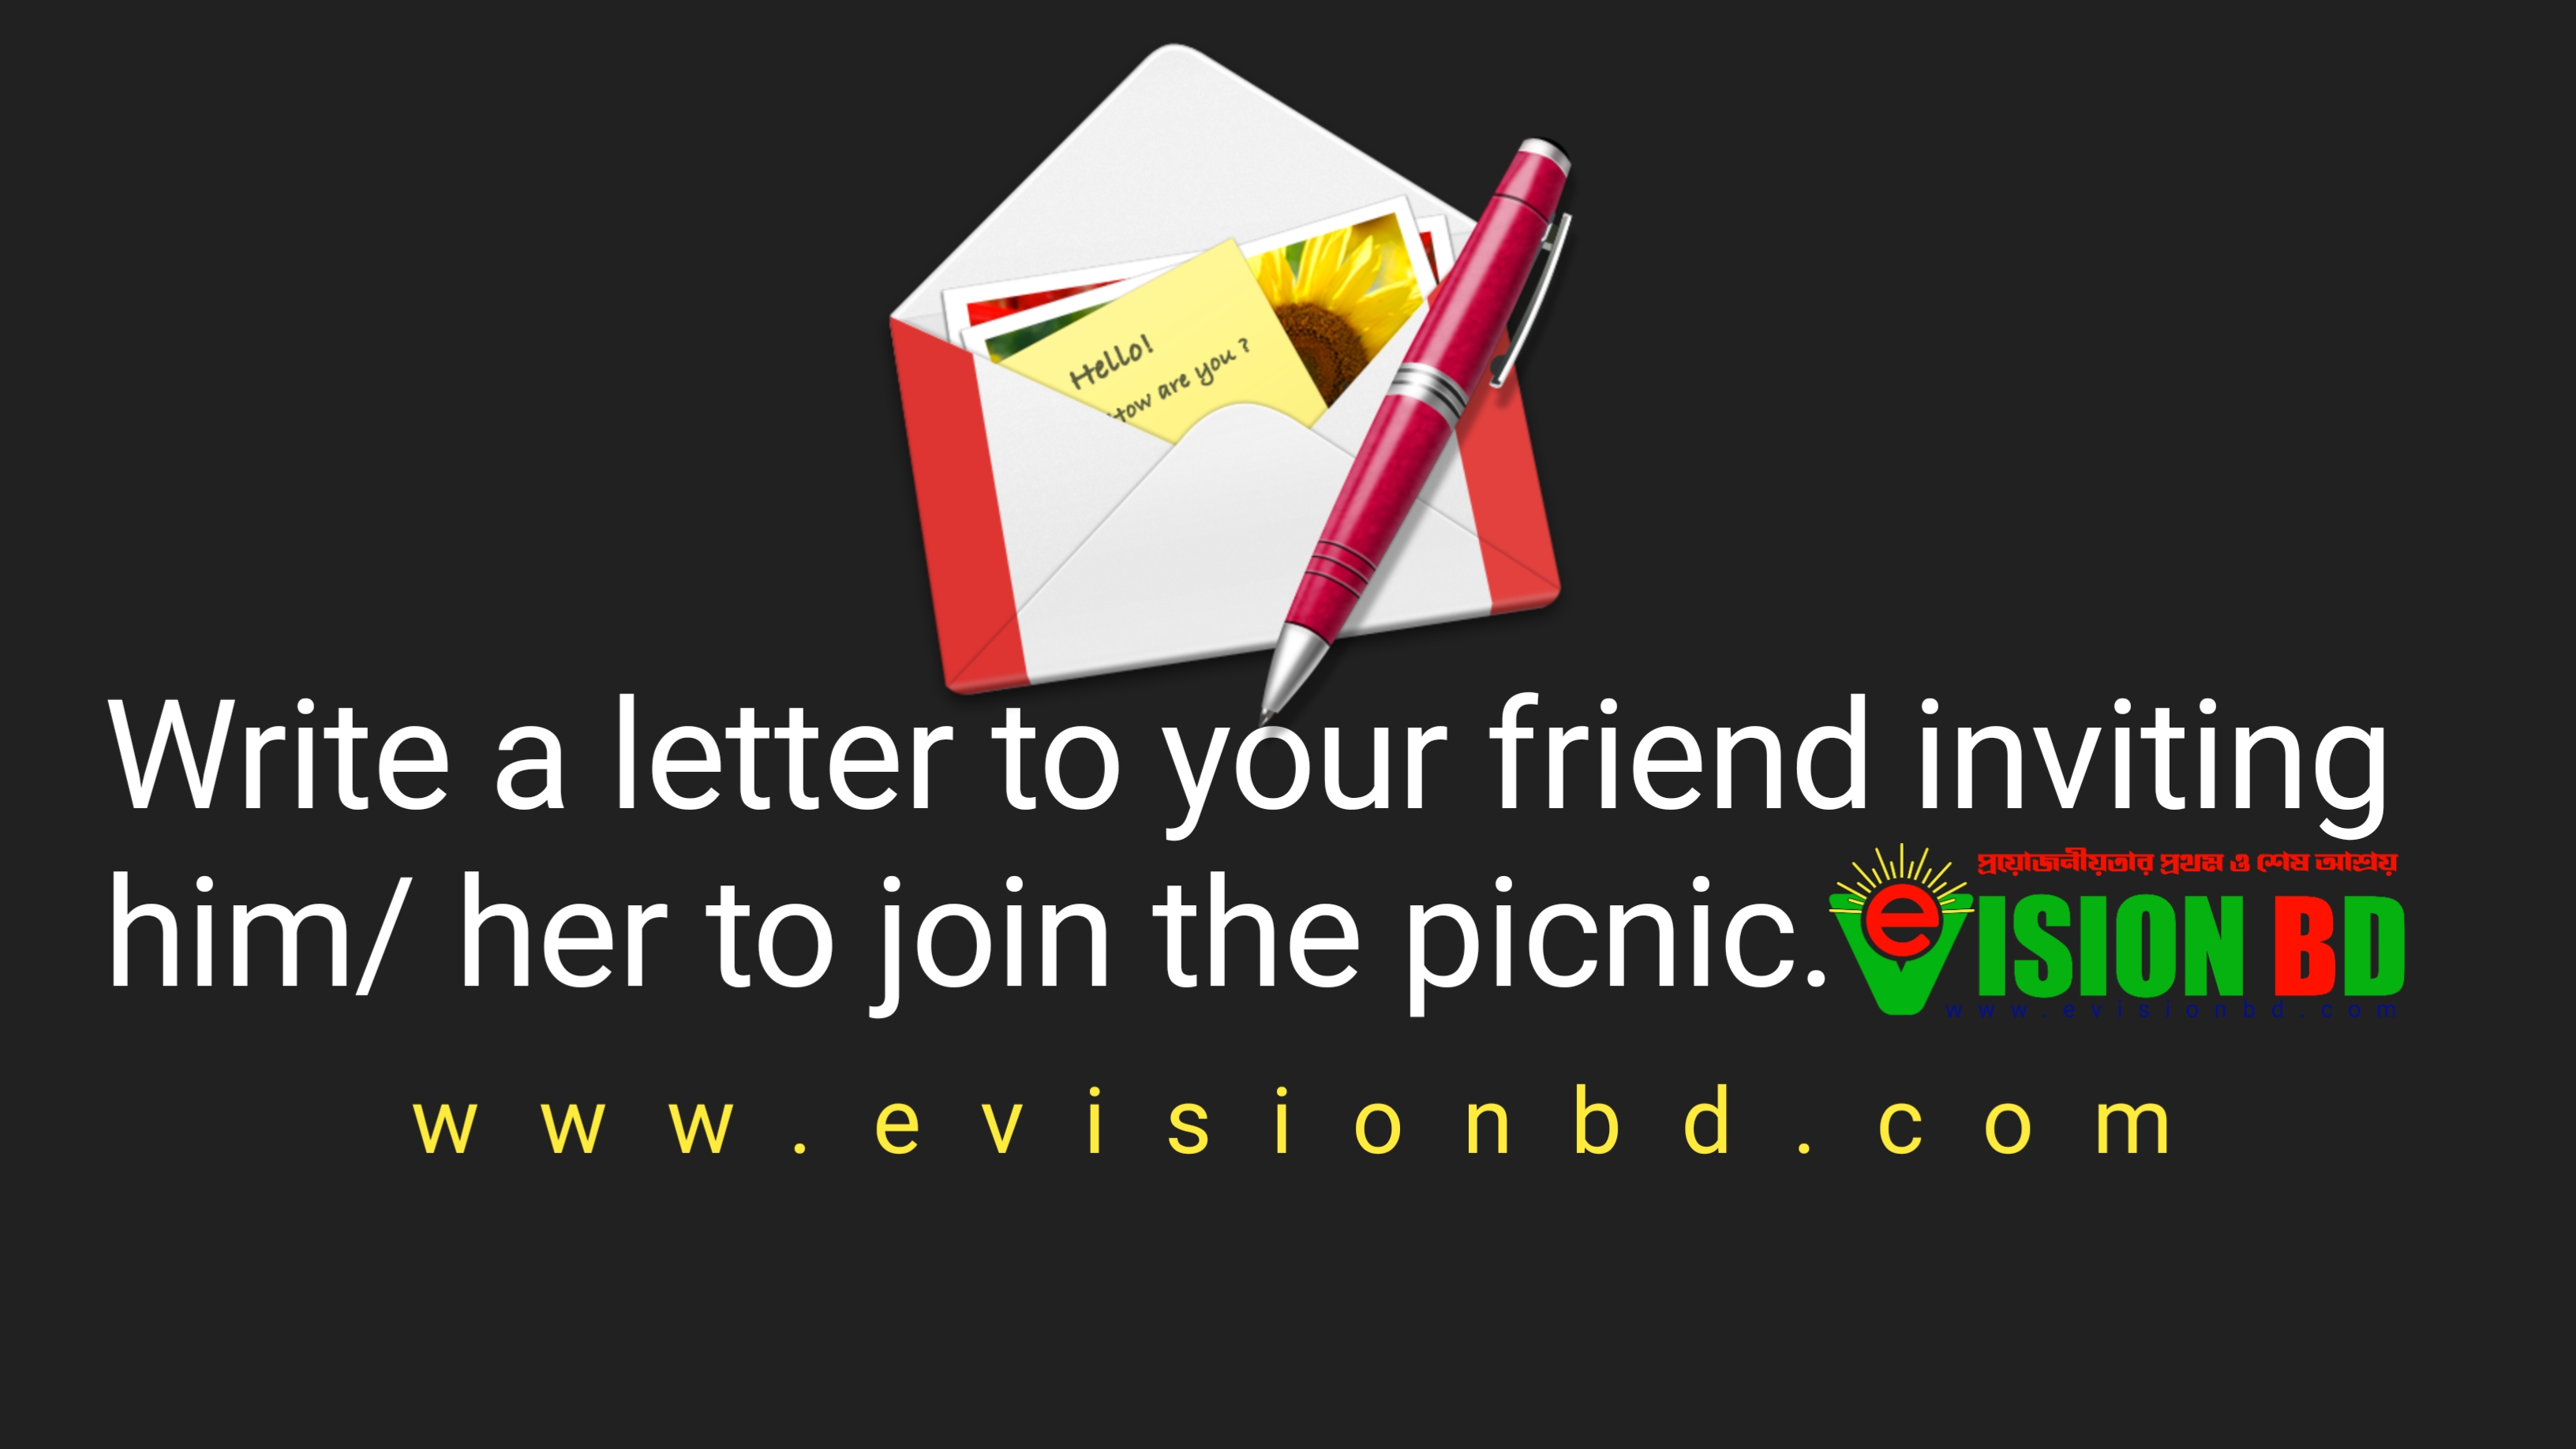 Now, write a letter to your friend inviting him to join the picnic